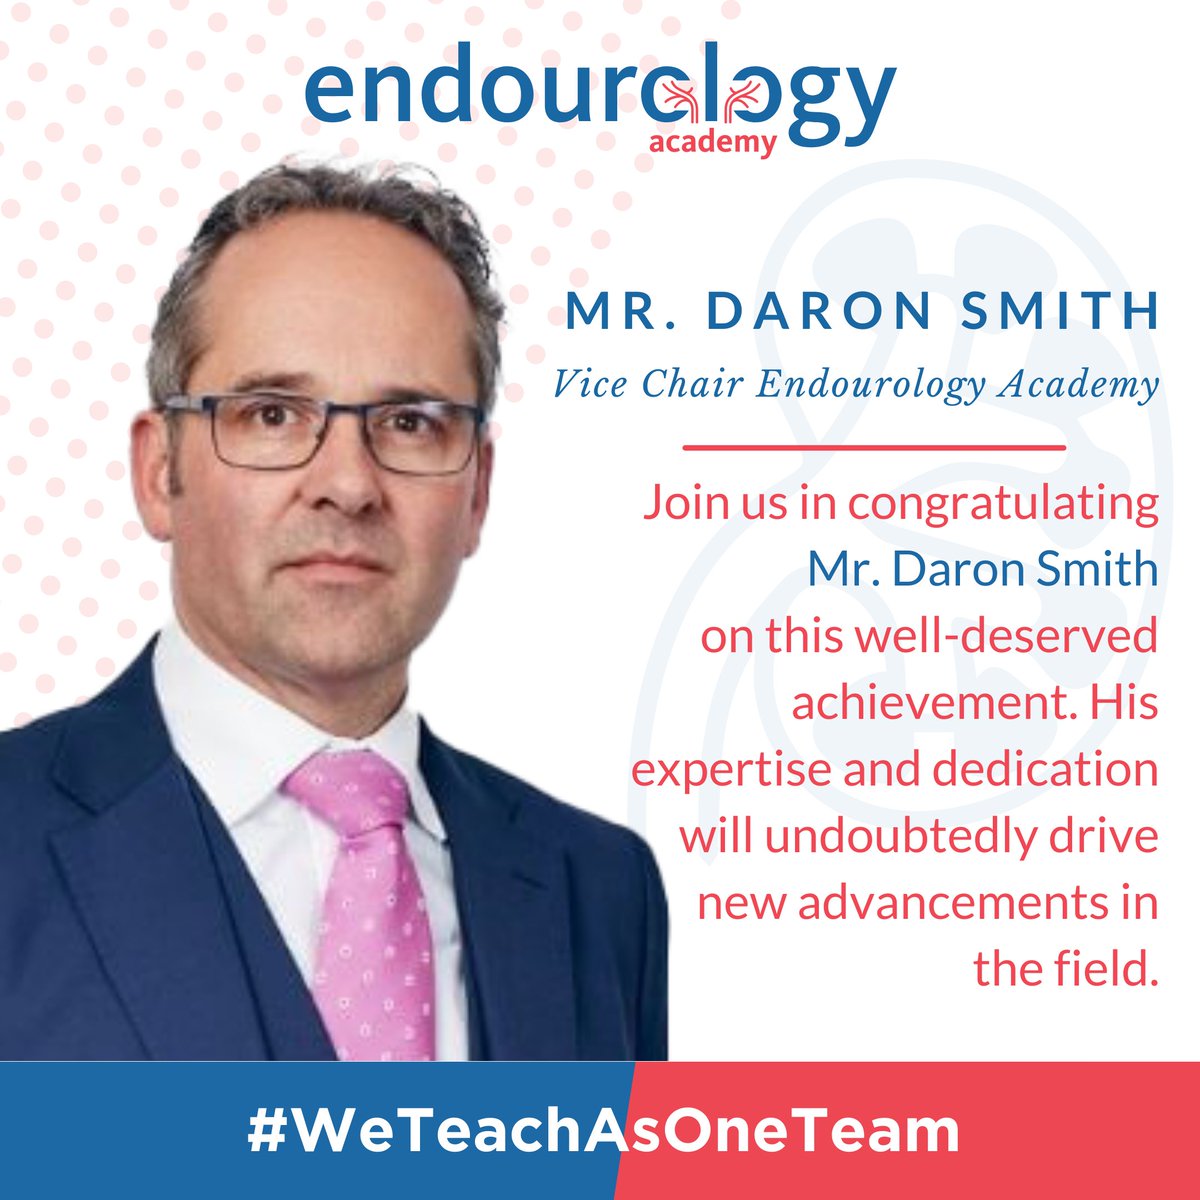 @EndoLuminalEndo has been appointed as the Vice Chair of @endouroacademy Join us in congratulating Daron on this well-deserved achievement. His expertise & dedication will undoubtedly drive new advancements. Cheers to a future filled with innovation and collaboration!